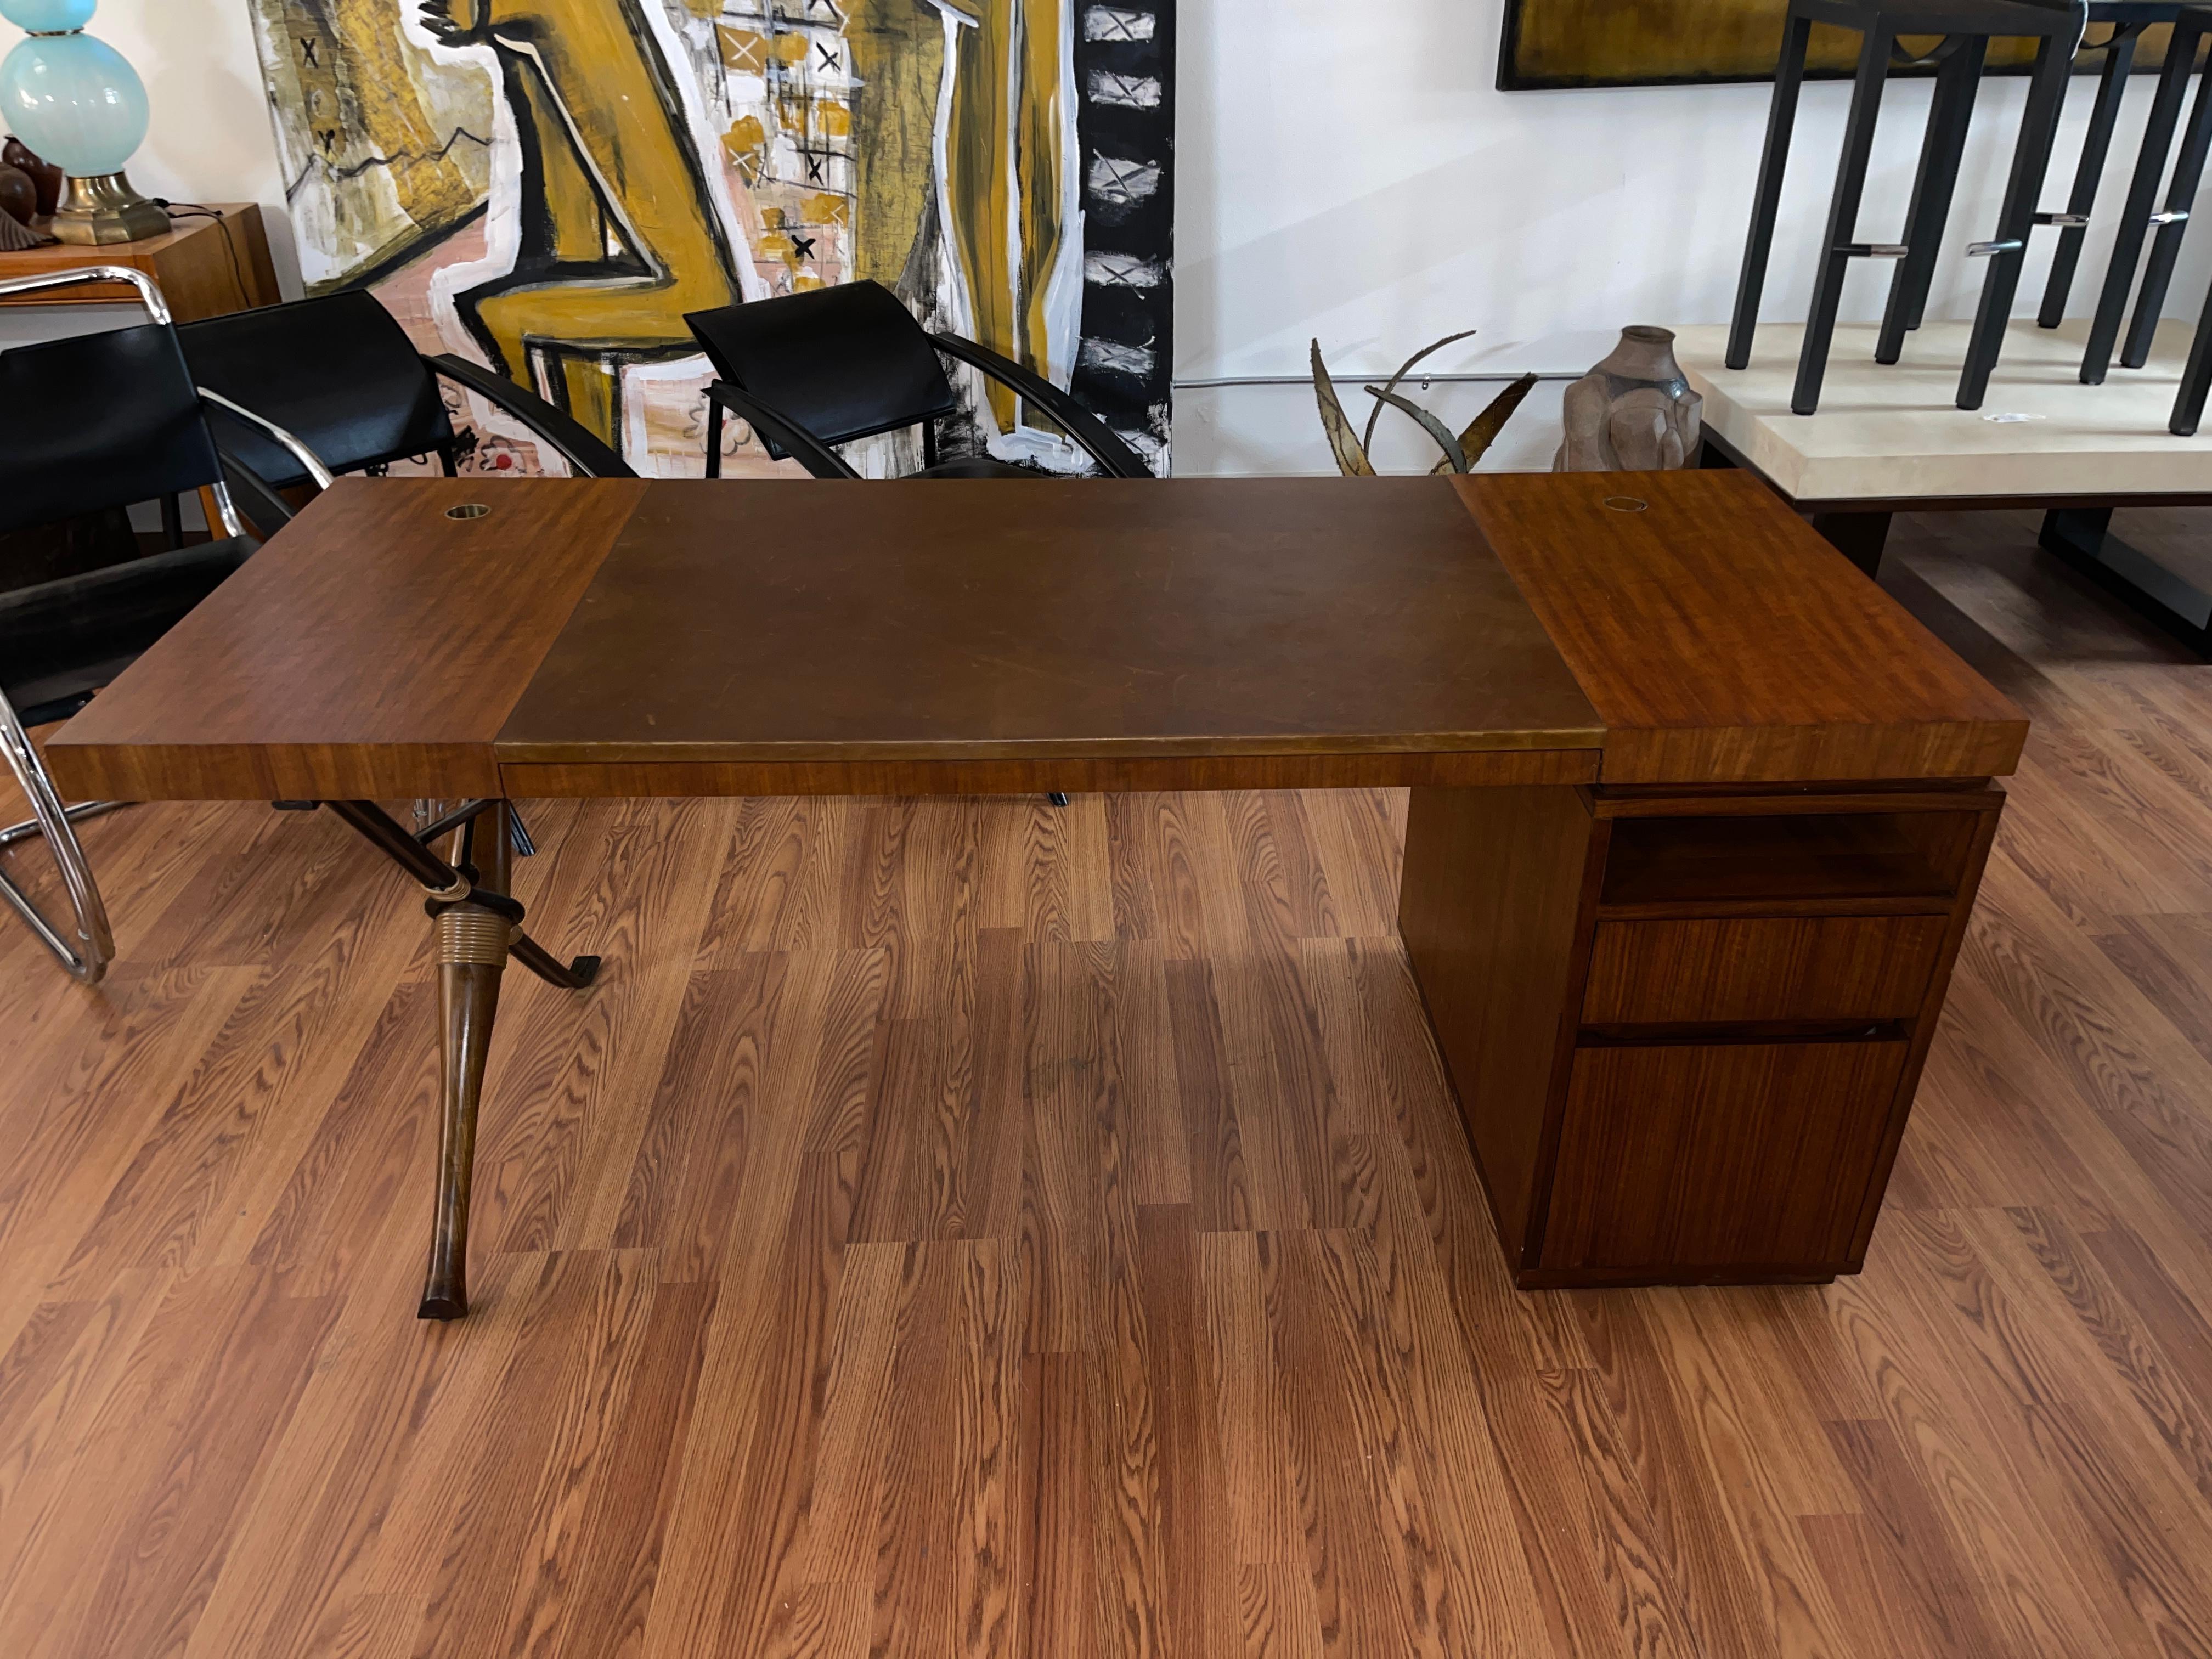 Beautiful Baton Desk or writing table designed by Bill Sofield for McGuire / Baker. 
Leather insert on top. Three drawers on one side and a storage spot on the other. Can be used as a partners desk as seen in the last photo, where it’s pictured